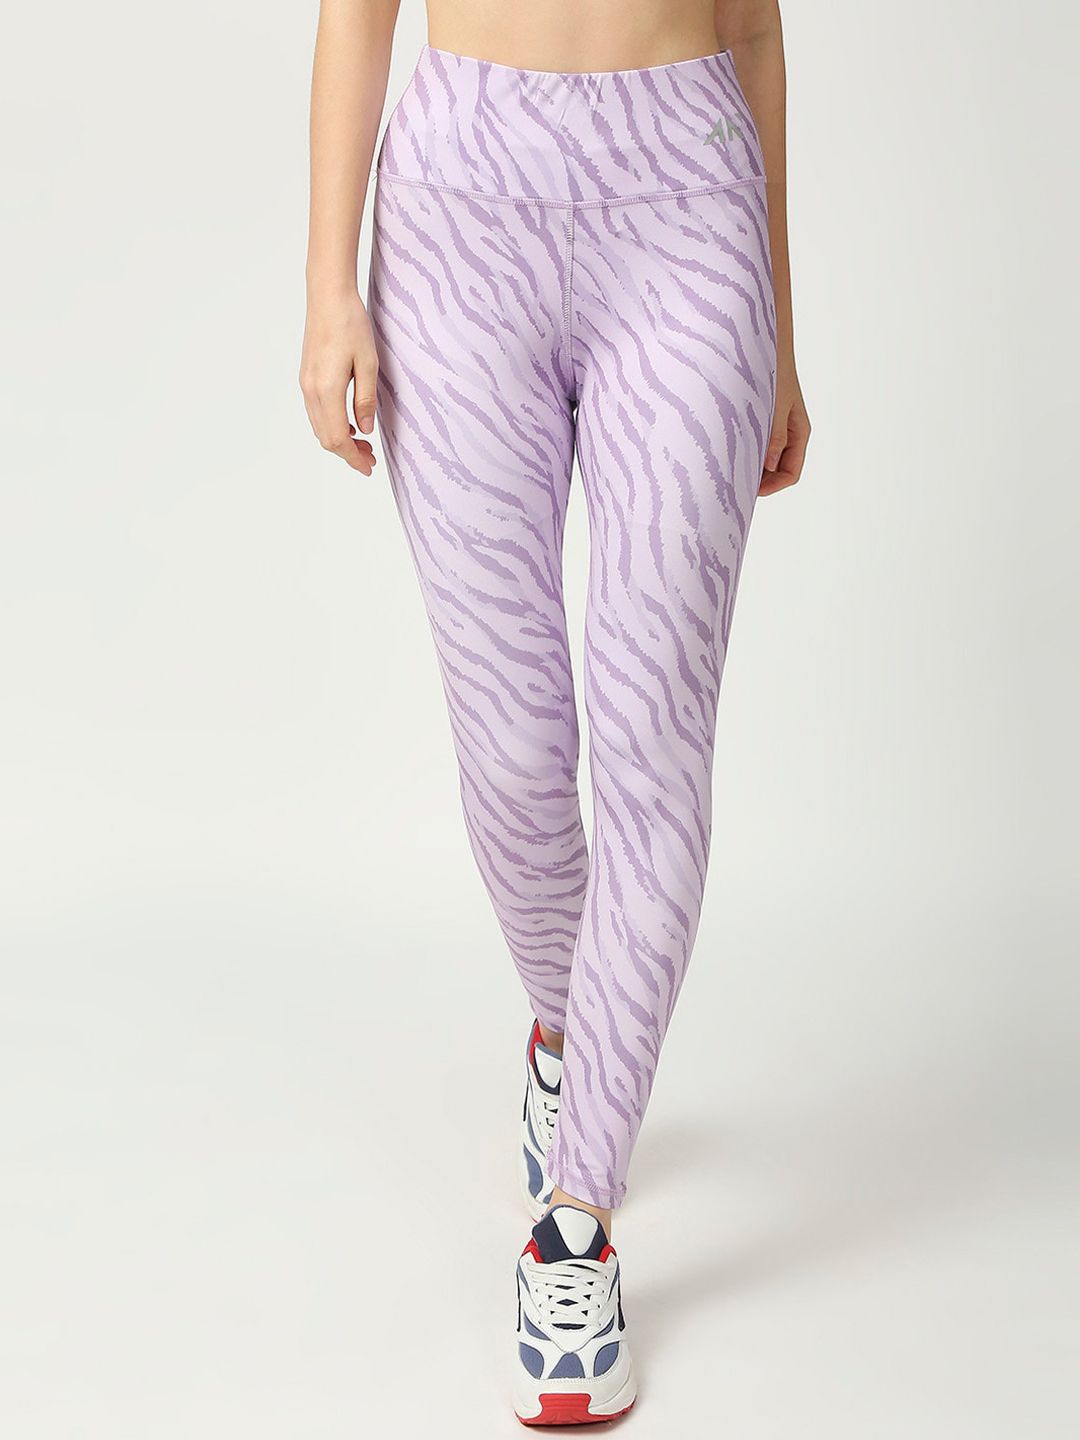 AESTHETIC NATION Women Lavender Printed Dry Fit Tights Price in India